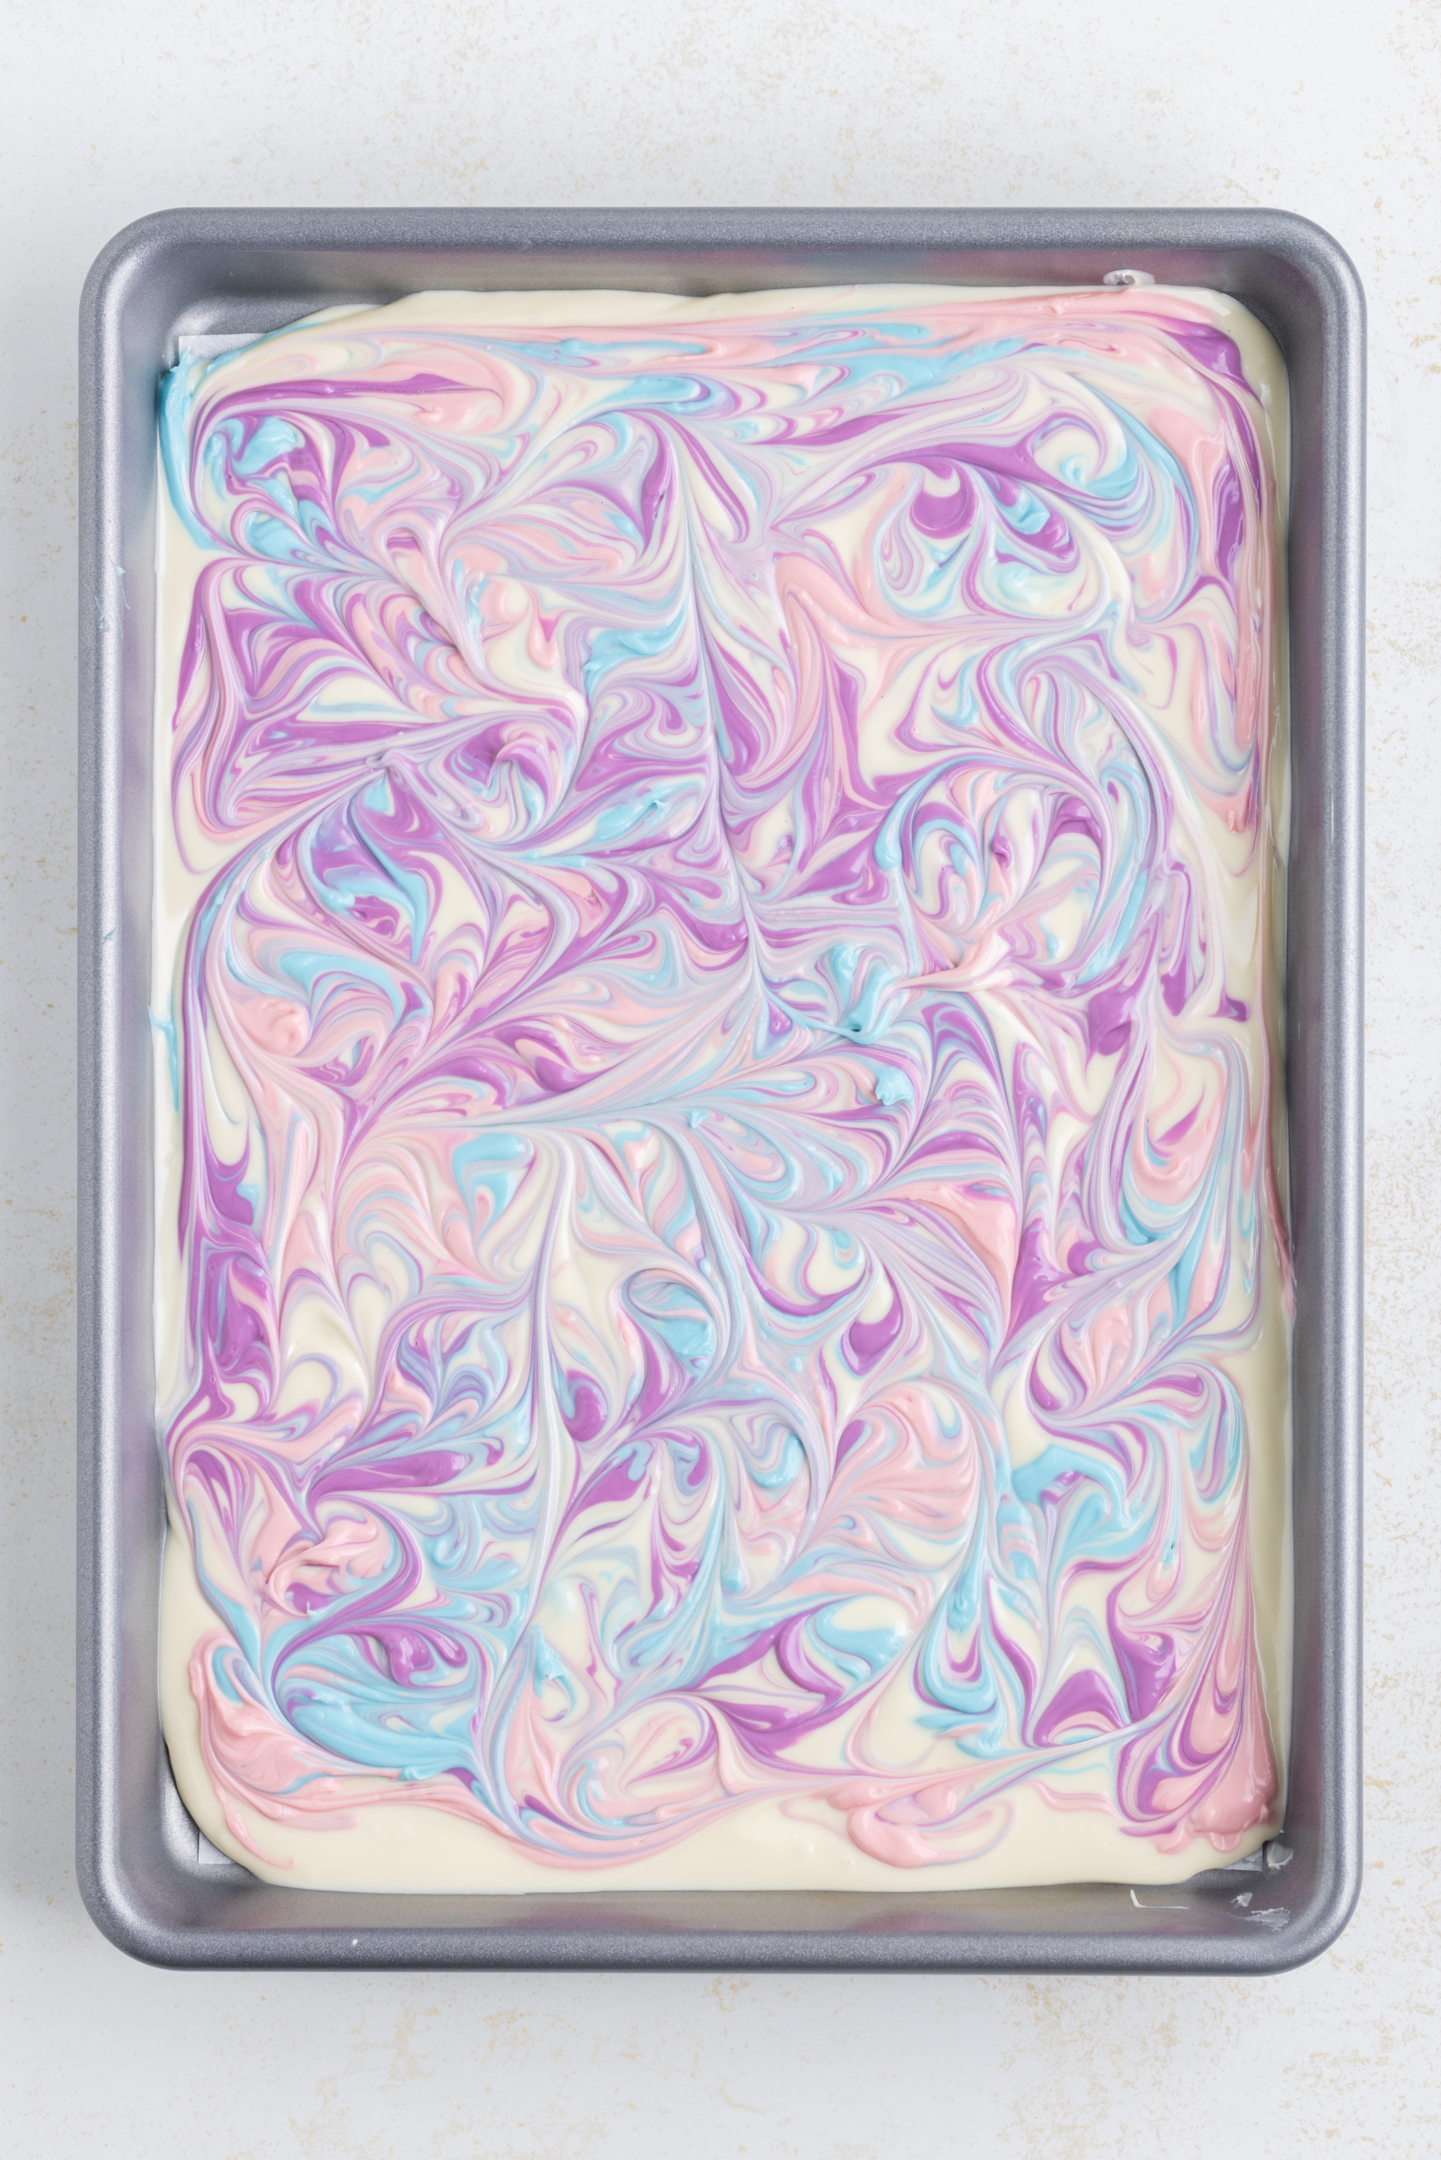 white chocolate and candy melts swirled together on baking sheet